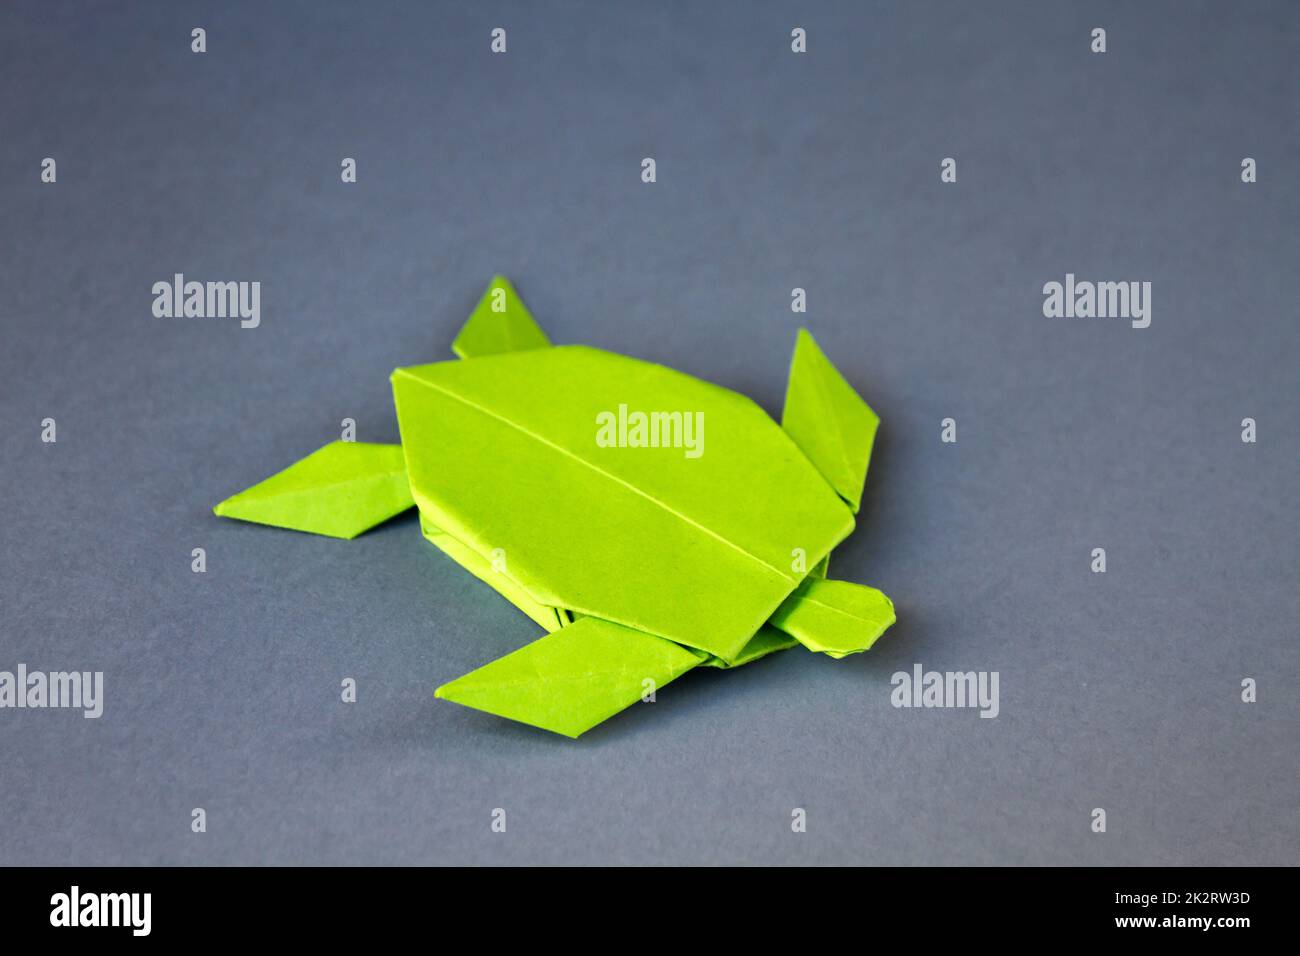 Green paper turtle origami isolated on a grey background Stock Photo